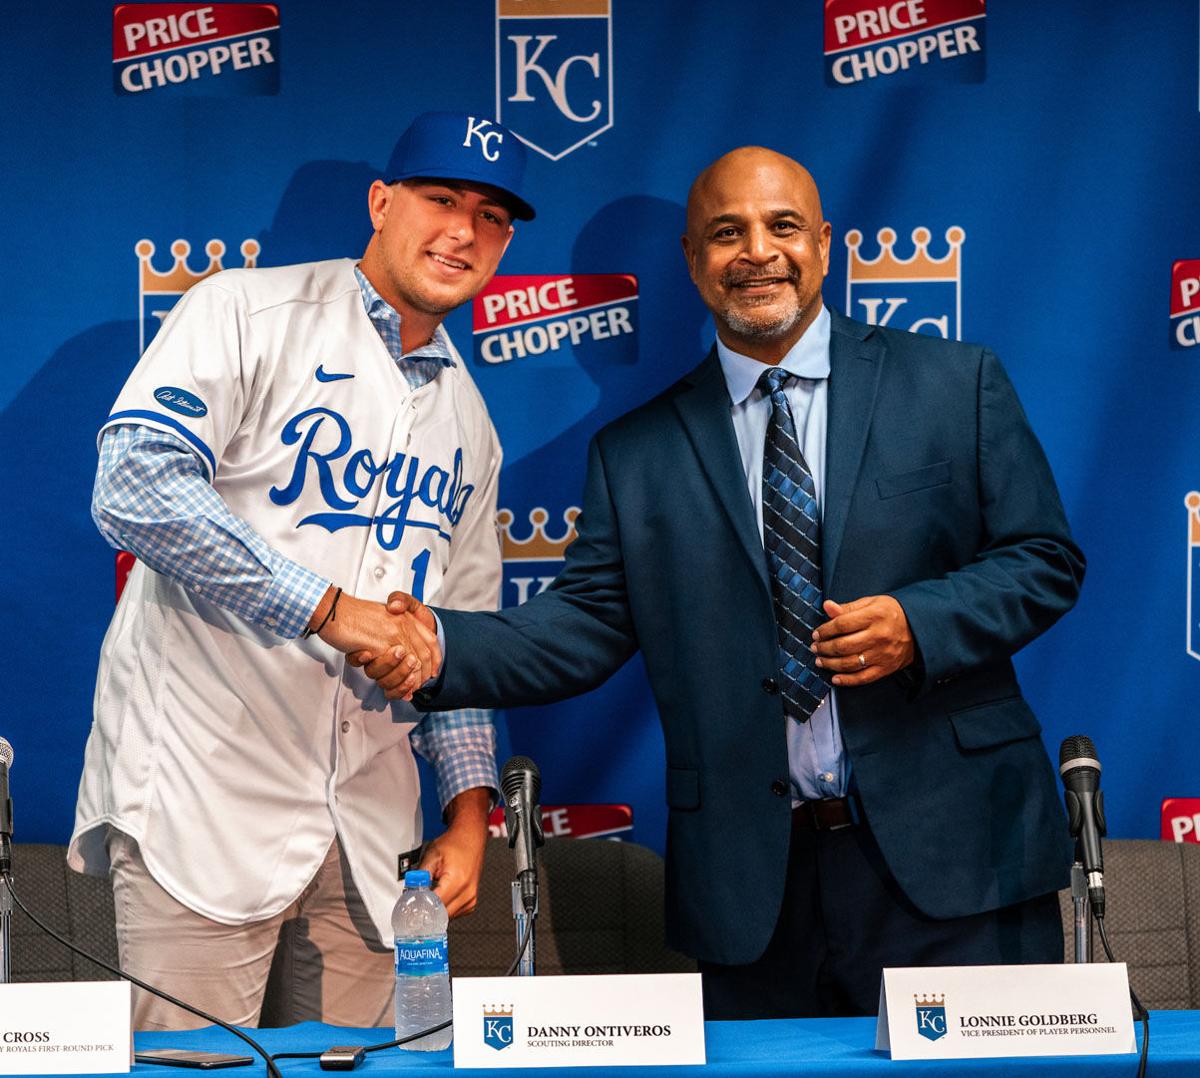 The Kansas City Royals are delivering wins with digital tech